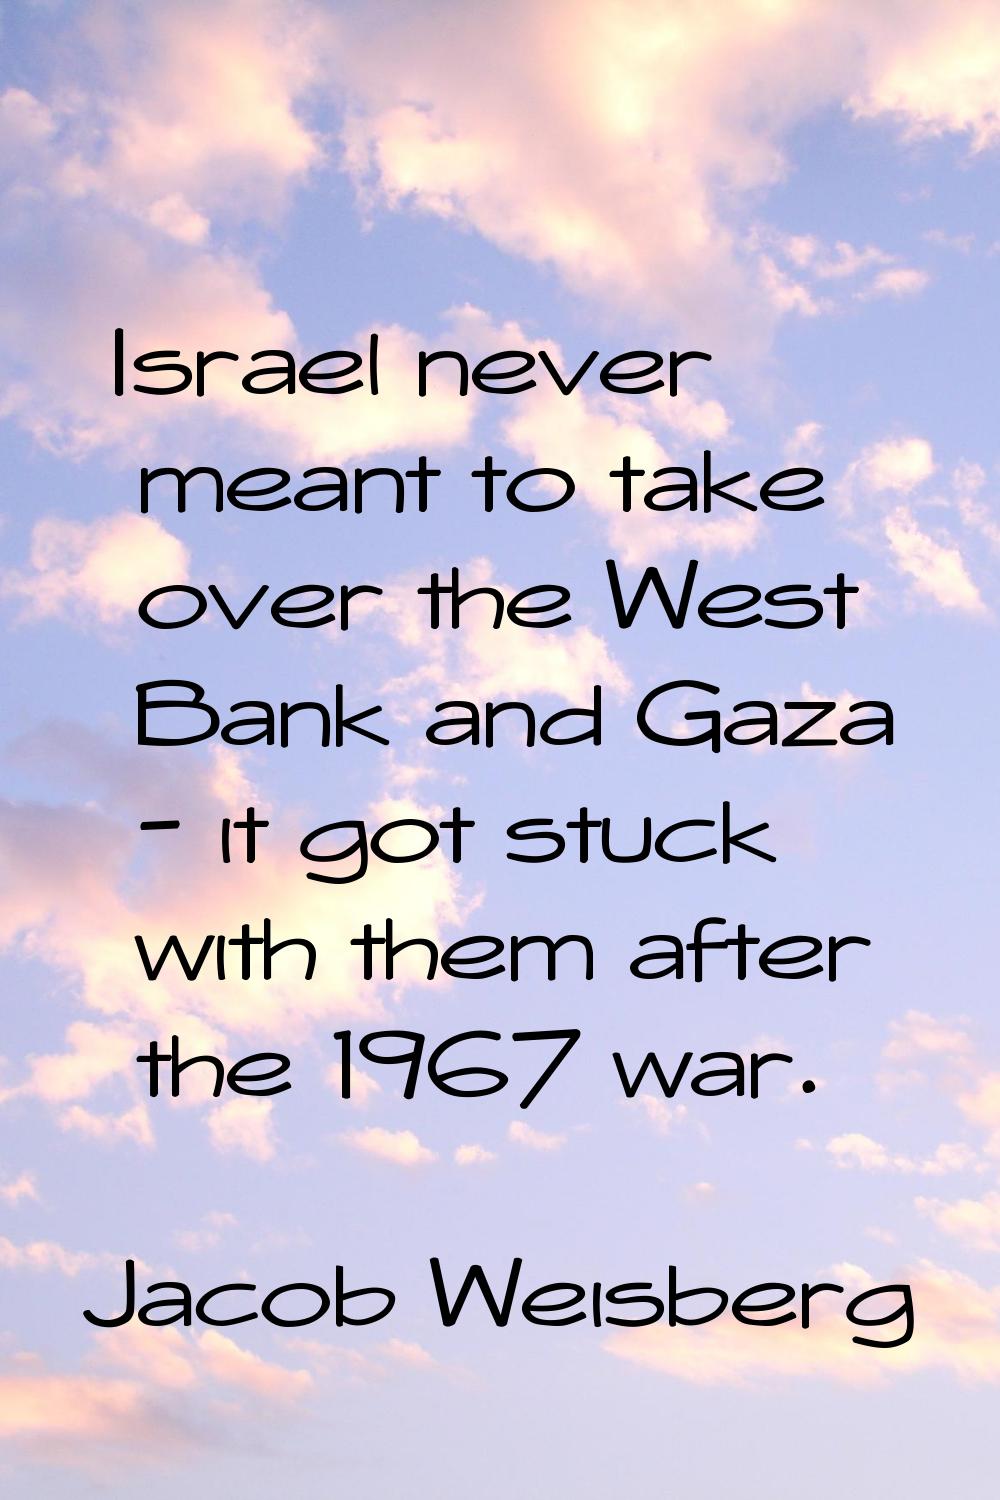 Israel never meant to take over the West Bank and Gaza - it got stuck with them after the 1967 war.